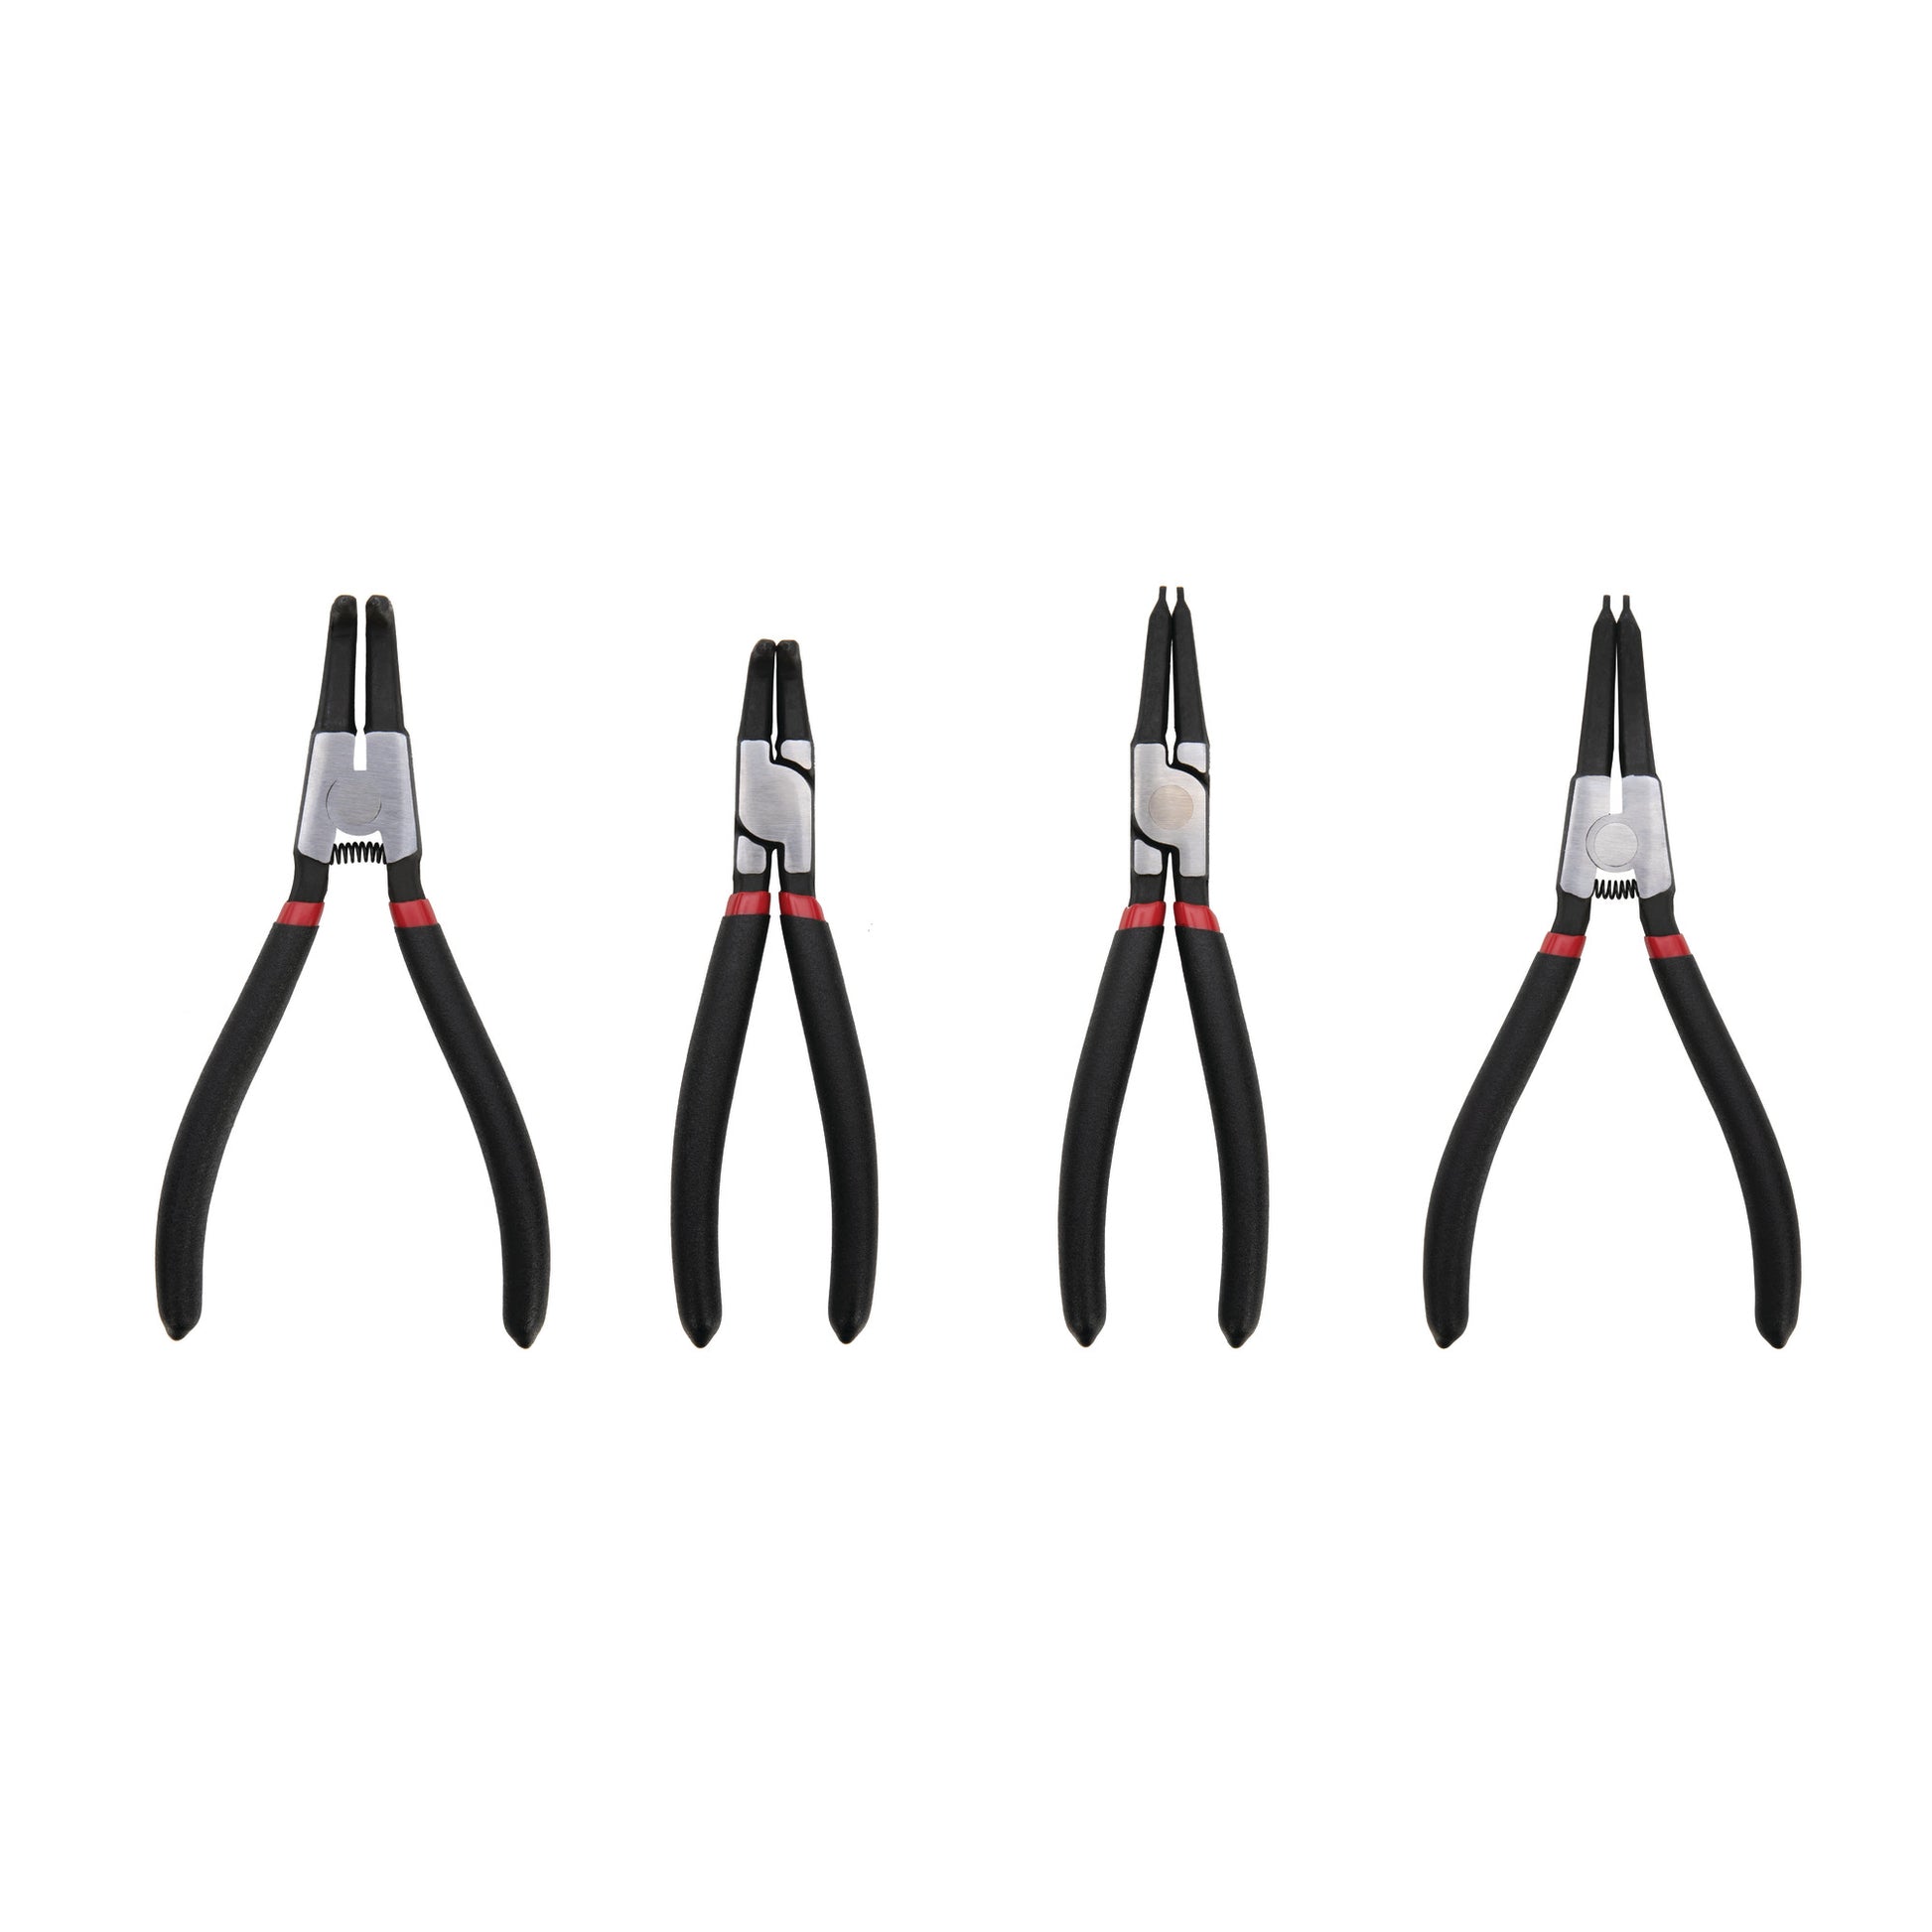 7-inch Professional Snap Ring Pliers Set - J3 Competition